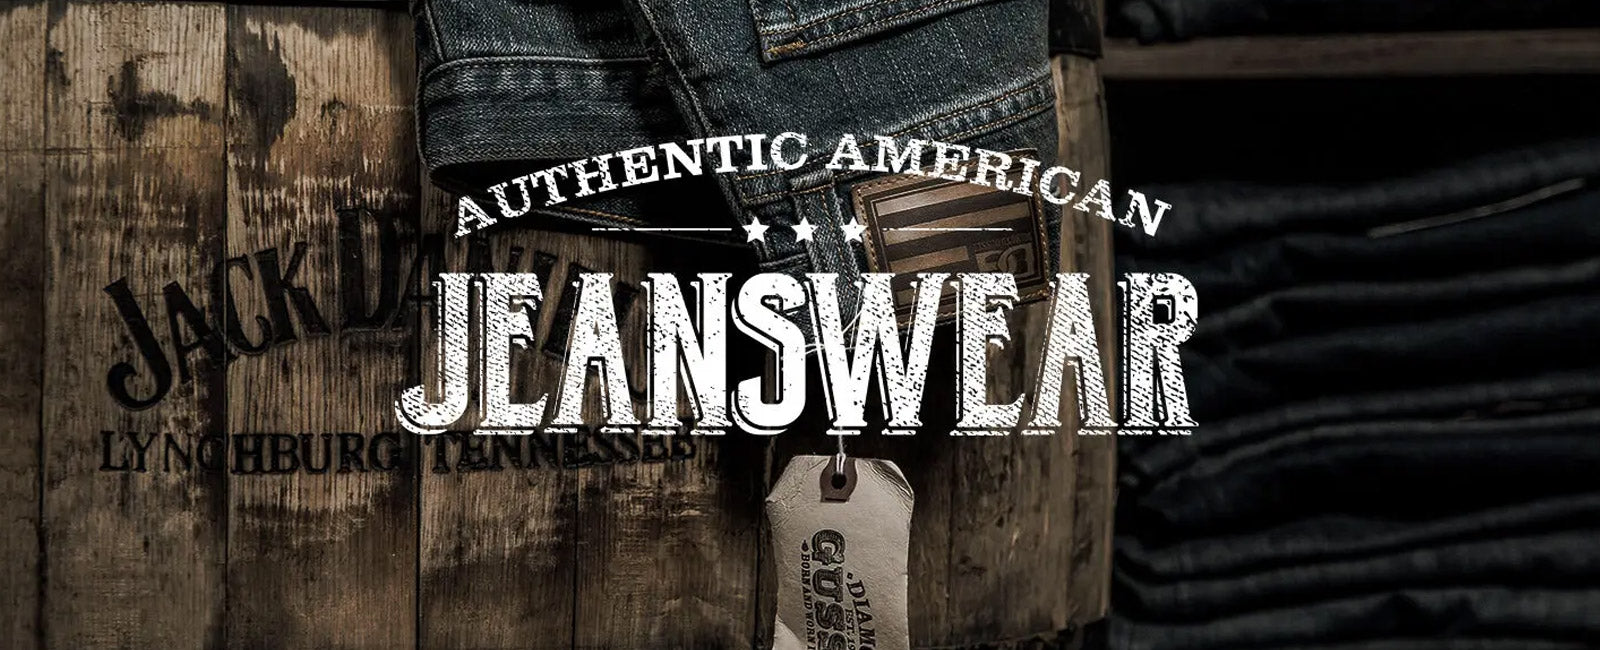 What is a Gusseted Crotch? - All American Clothing Co